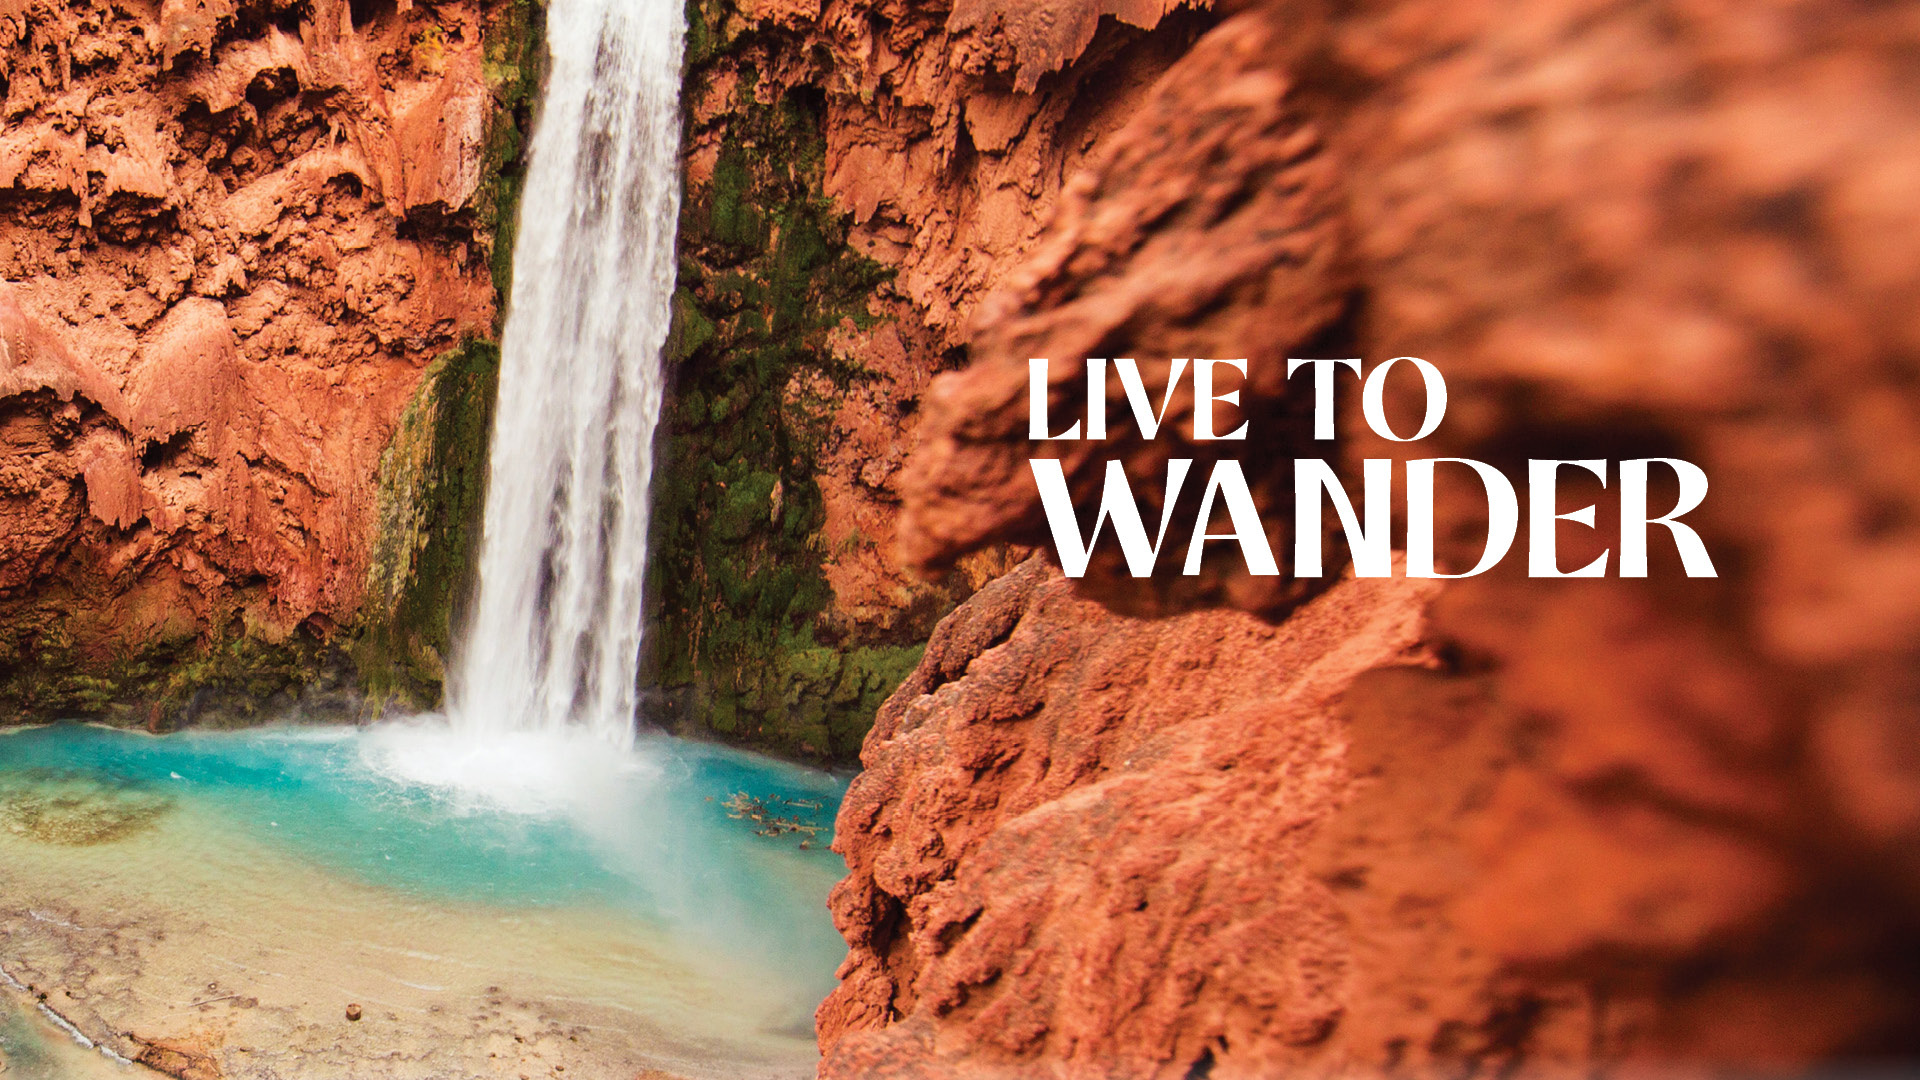 Waterfall photo, that says "Live to Wander"